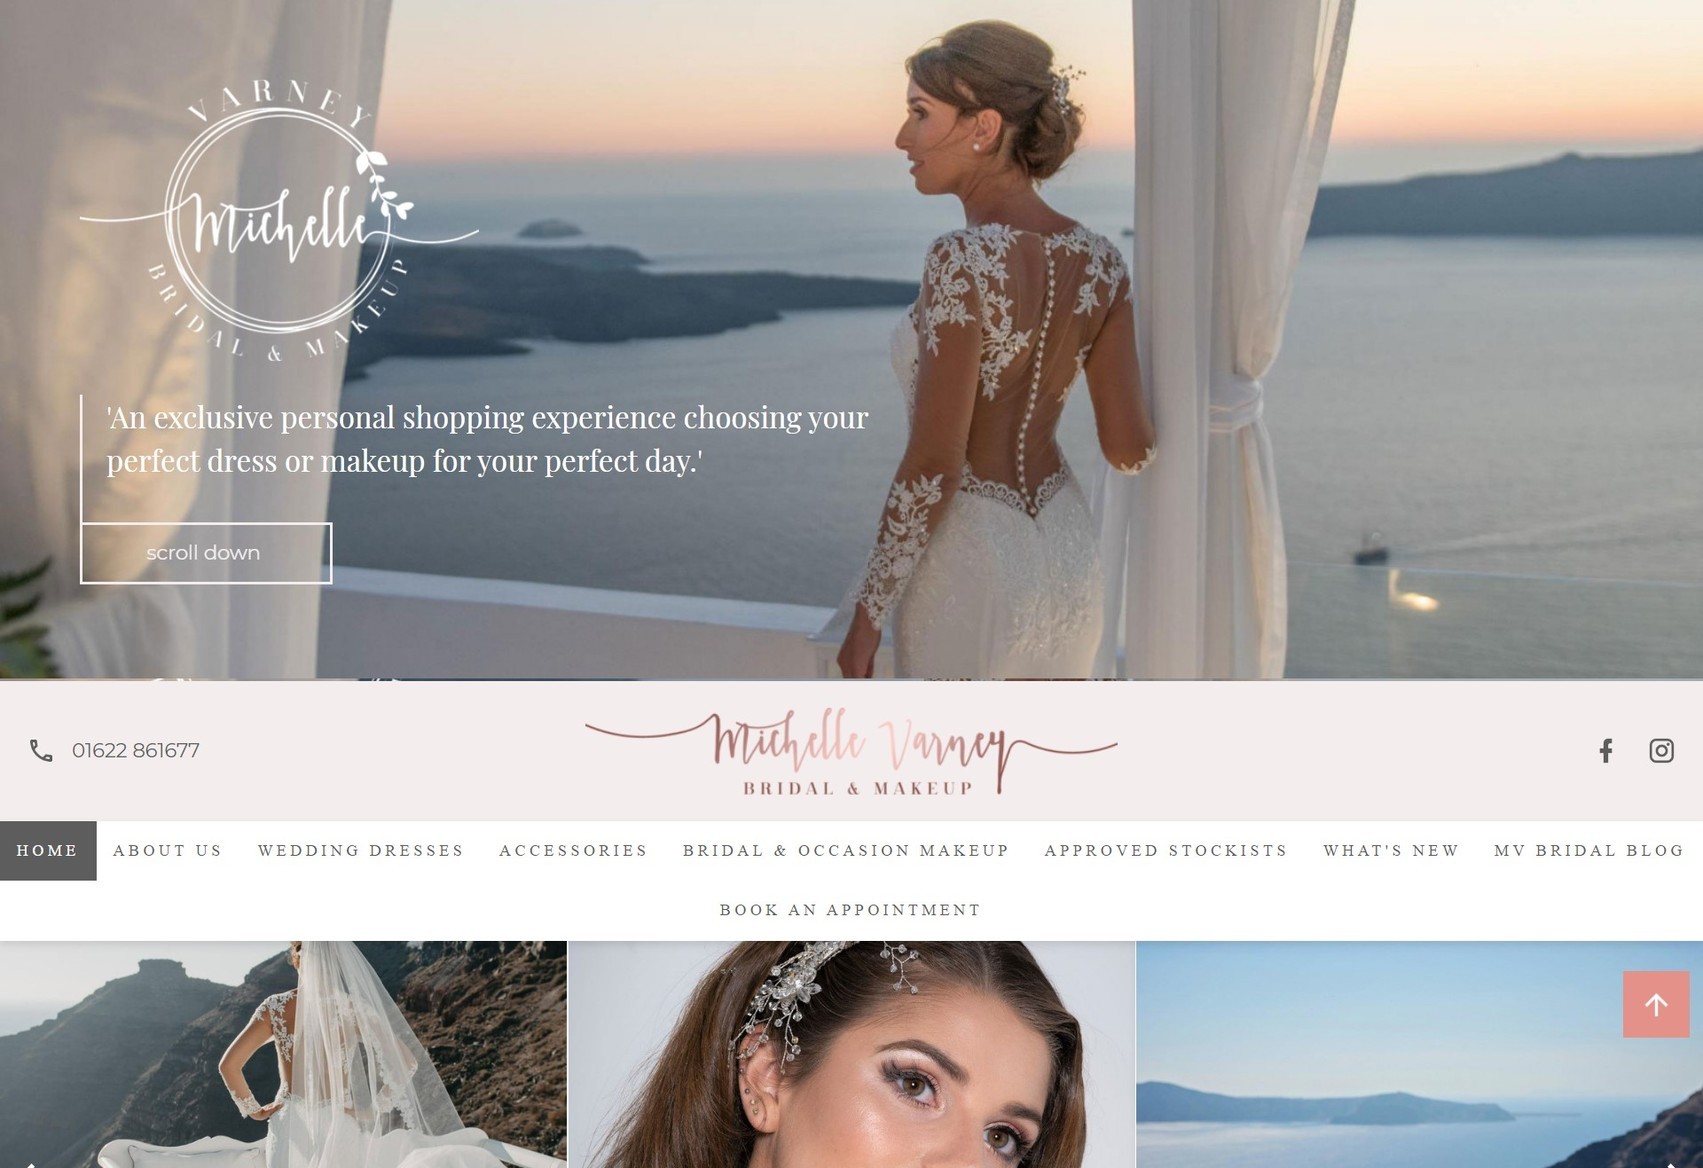 A lovely responsive website design for bridal makeup, dress and hair.